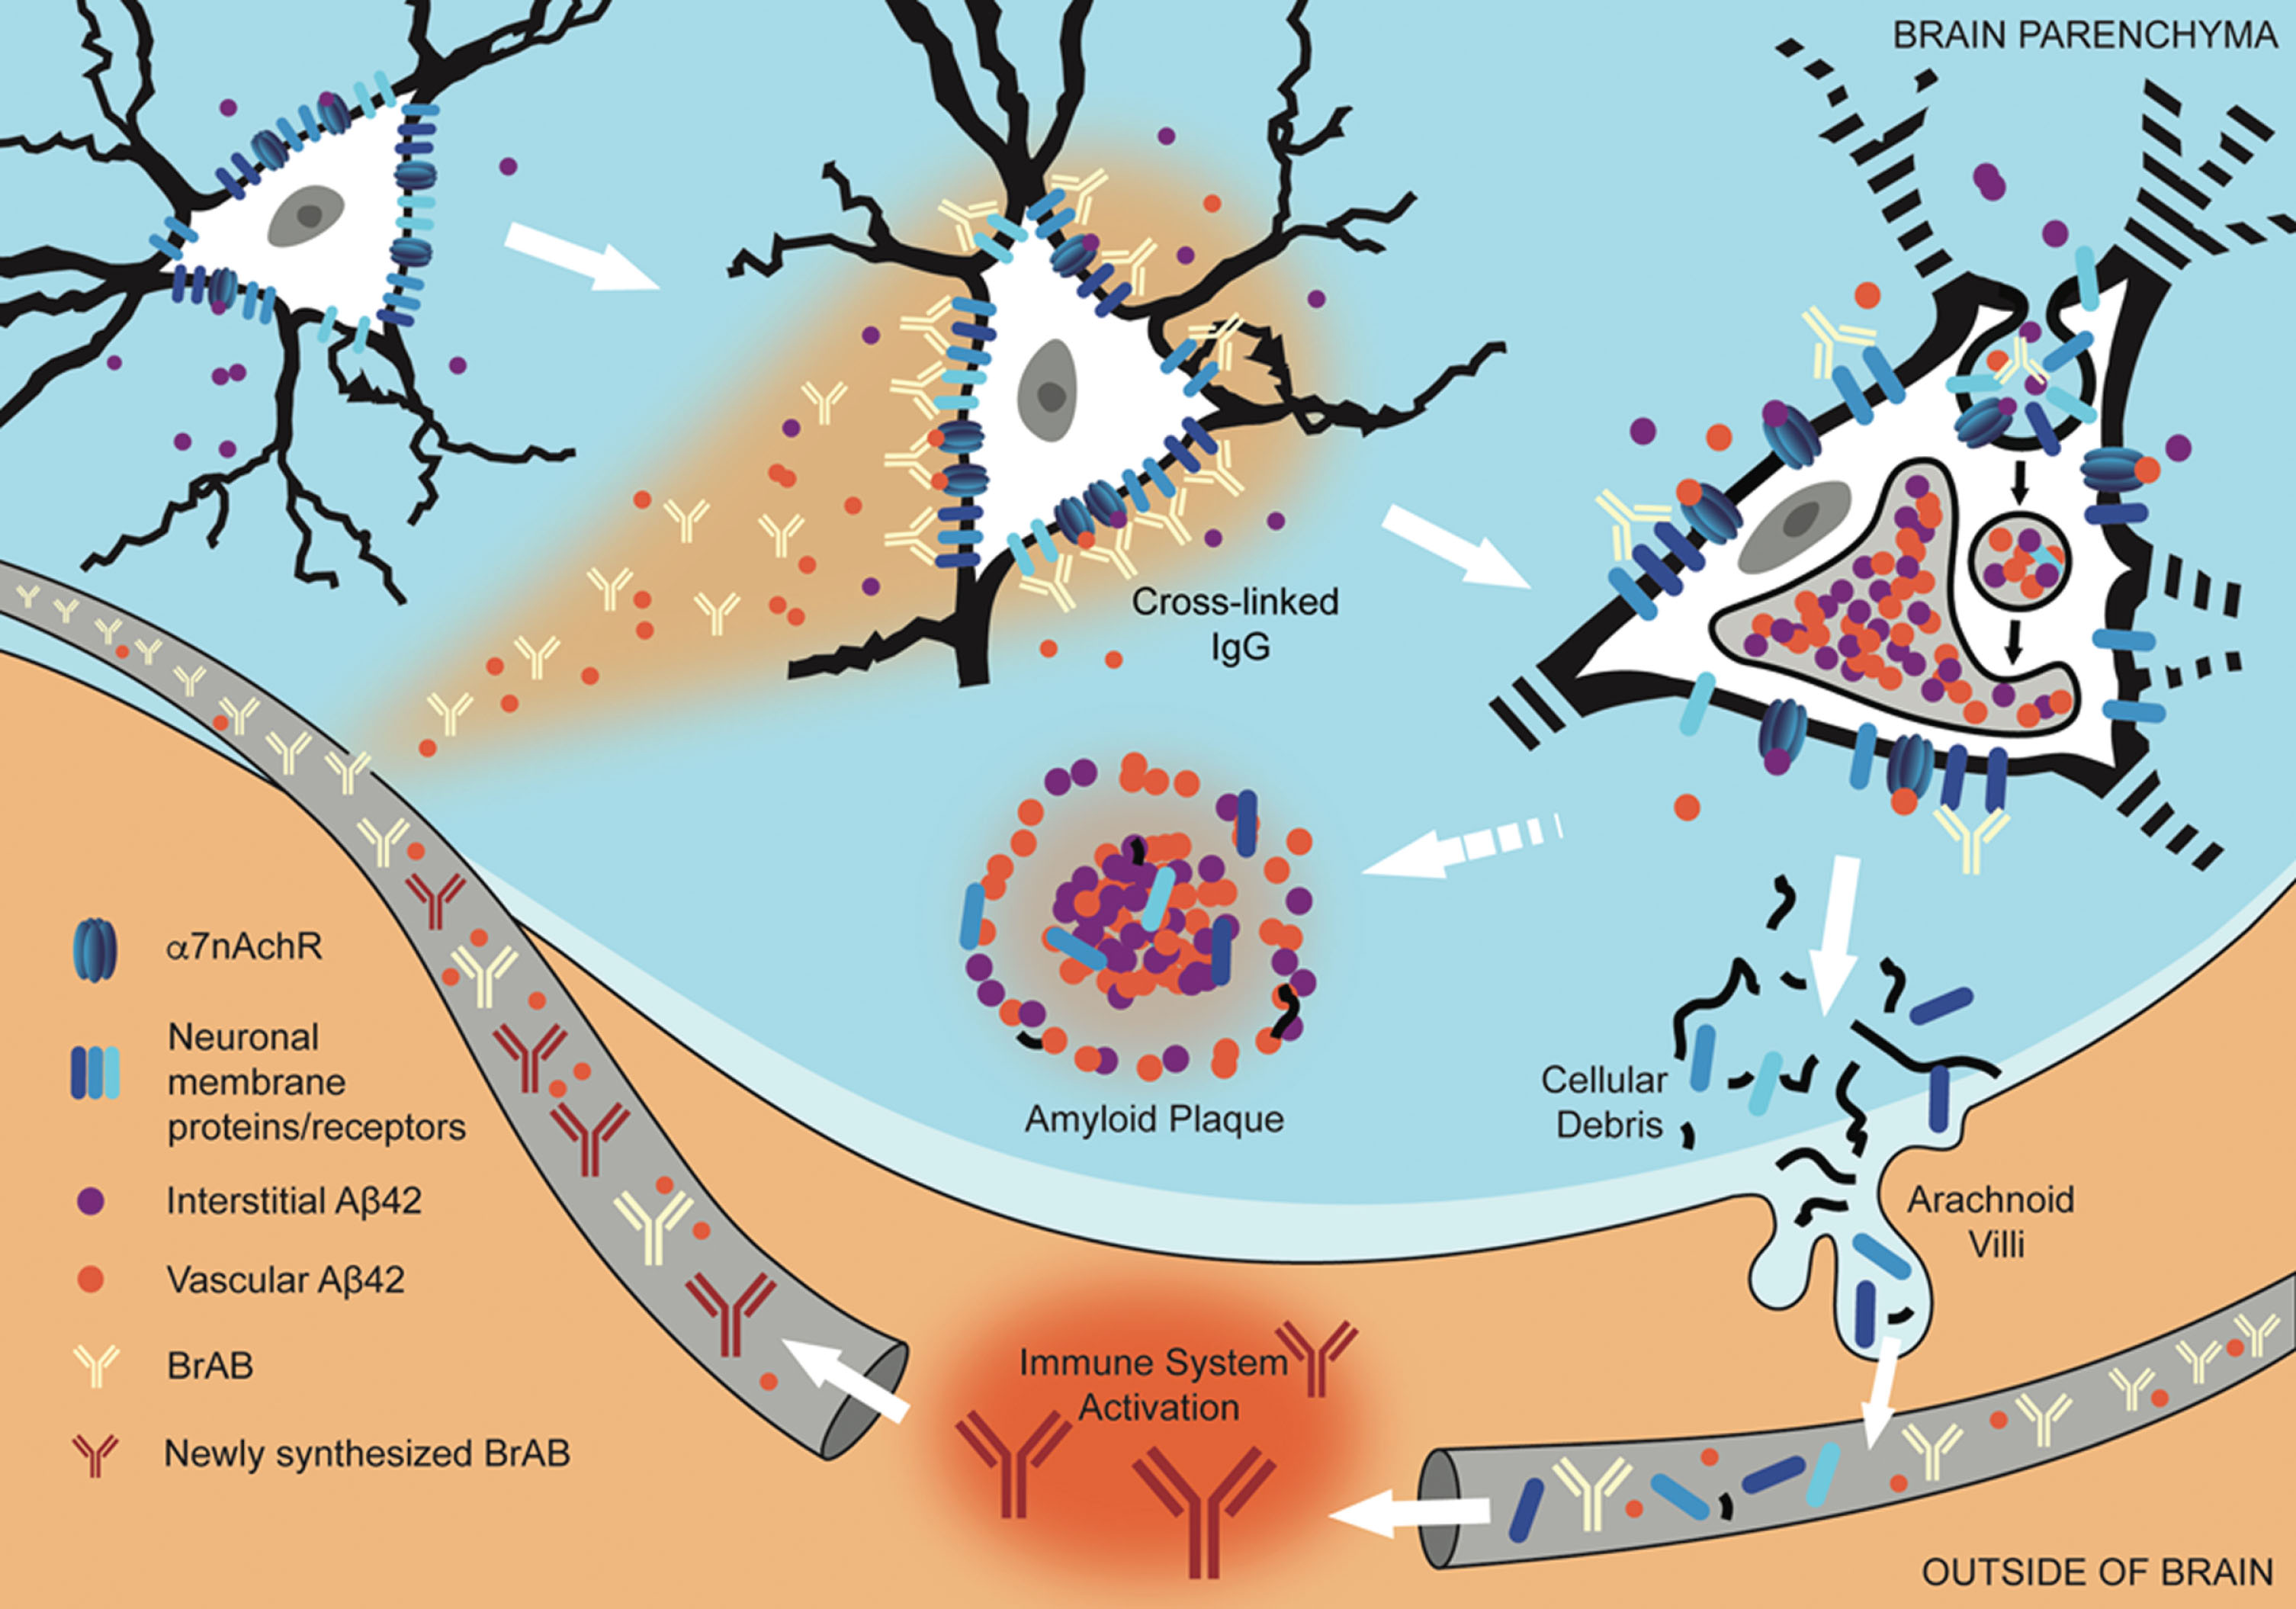 Interaction of extravasated BrABs with NSPs triggers endocytosis and results in intraneuronal accumulation of Aβ42 and depletion of NSPs from cell surfaces. Under conditions of BBB compromise, blood-borne Aβ42 and brain-reactive autoantibodies flood into the brain parenchyma. Some interact with cognate neuronal surface proteins (including receptors; NSPs), while Aβ42 binds to α7nAChRs with picomolar affinity. Bivalent autoantibodies cross-link their targets on neuronal surfaces, which can trigger endocytosis and internalization of cross-linked NSPs and surface-bound Aβ42-α7nAChR complexes. Within the acidic environment of endosomes and lysosomes, Aβ42 forms aggregates which are non-degradable and tend to accumulate. Over time, chronic leak of autoantibodies into the brain tissue results in continual internalization of Aβ42 within neurons, which interferes with their proper functioning and leads to failure to maintain their dendritic trees and associated synapses. Death and lysis of these Aβ42-overburdened neurons contributes to the formation of amyloid plaques (APs). This cell death is also a source of neuronal debris that finds its way into cerebrospinal fluid and, via arachnoid villi, into the general circulation, where it triggers an immune response leading to production of autoantibodies directed against such neuronal debris. Under conditions of increased BBB permeability, these are able to access cell surface-bound targets in the brain and thus perpetuate the engine that drives the observed pathology.